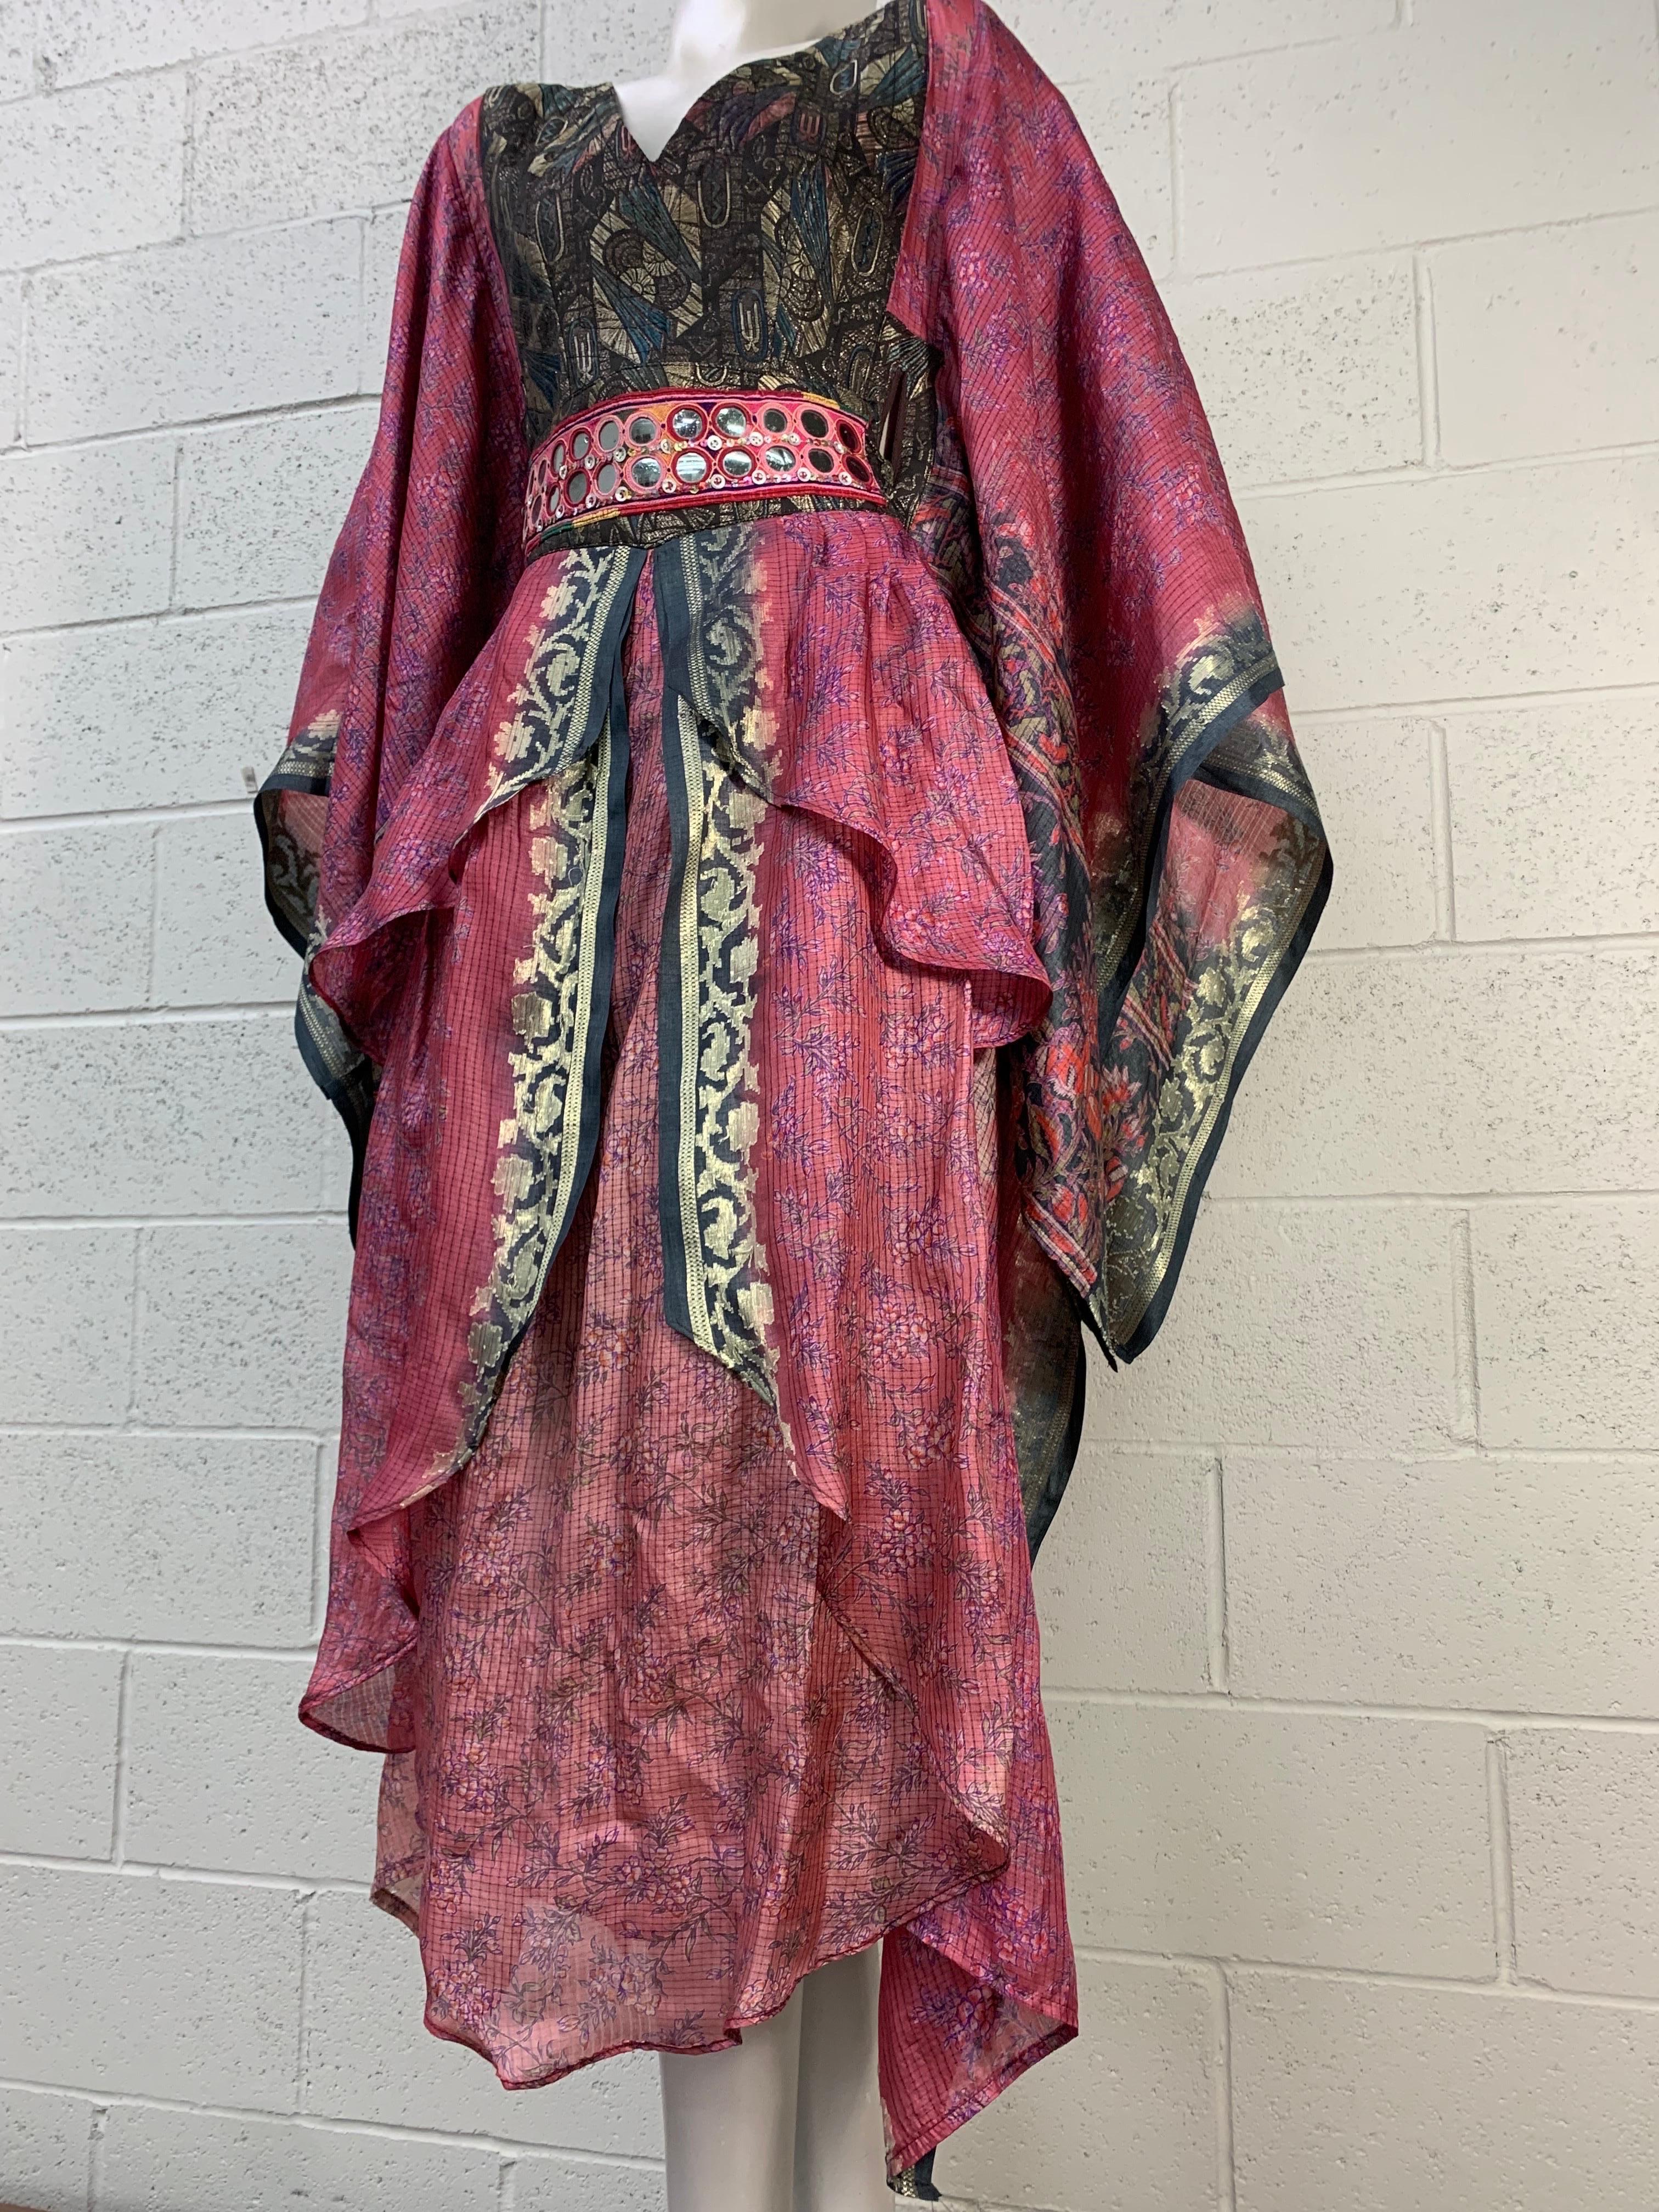 Torso Creations 2-Piece Apron-Front Sari Caftan w Mirrored and Embroidered Belt In Excellent Condition For Sale In Gresham, OR